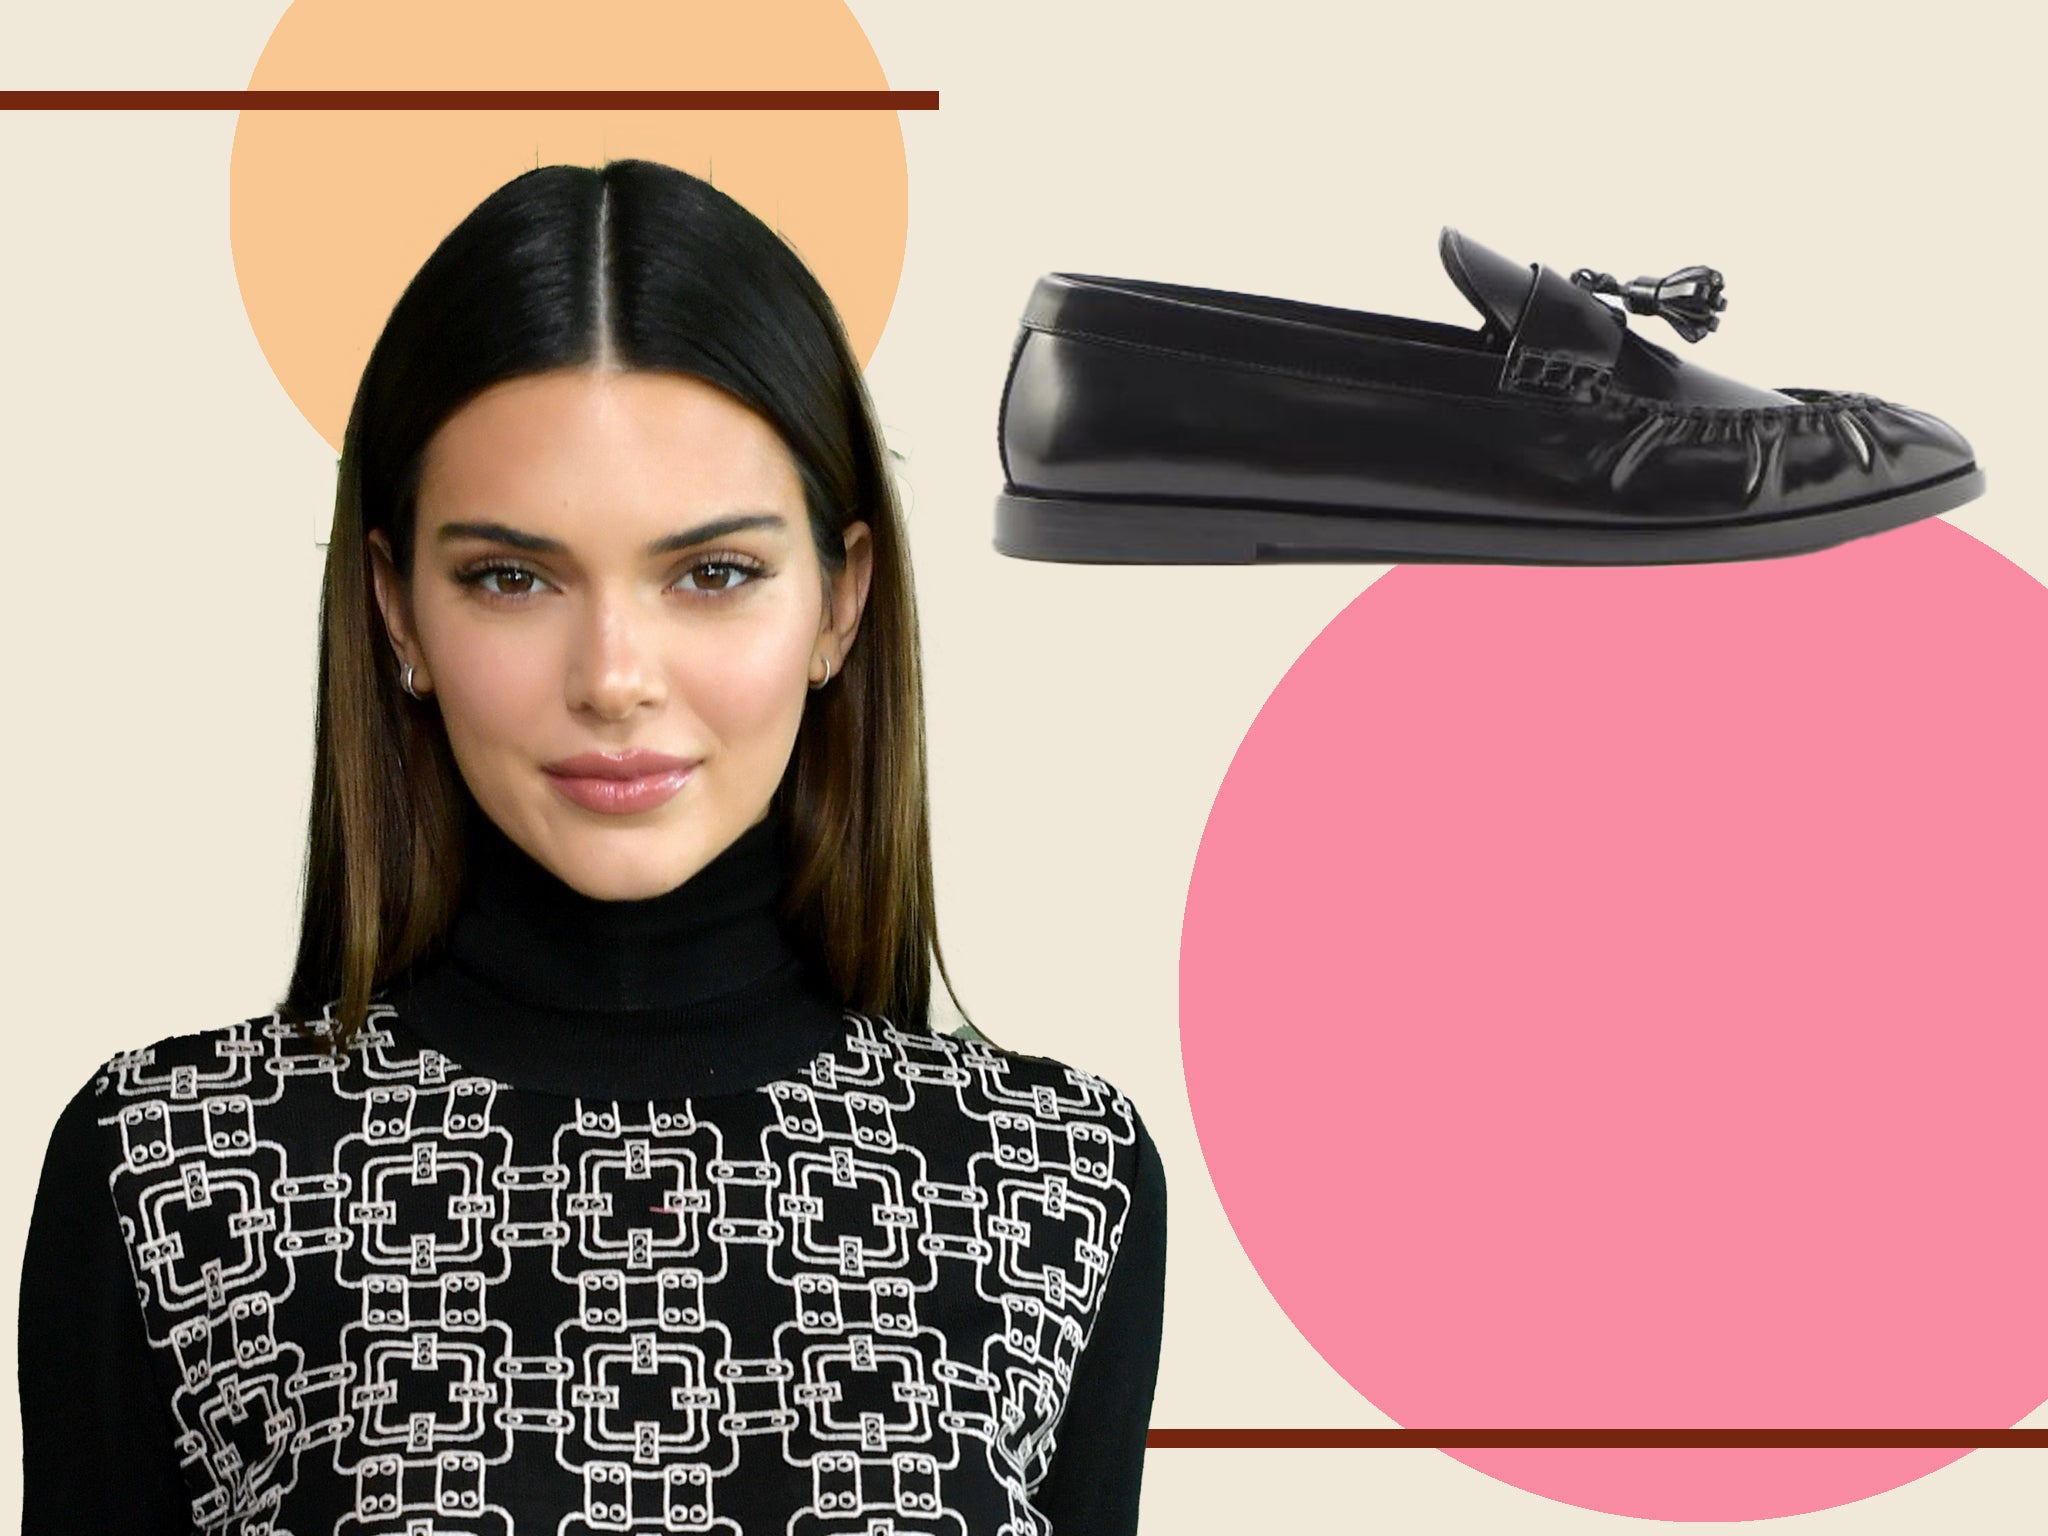 The preppy look will take you into autumn-style mode with ease